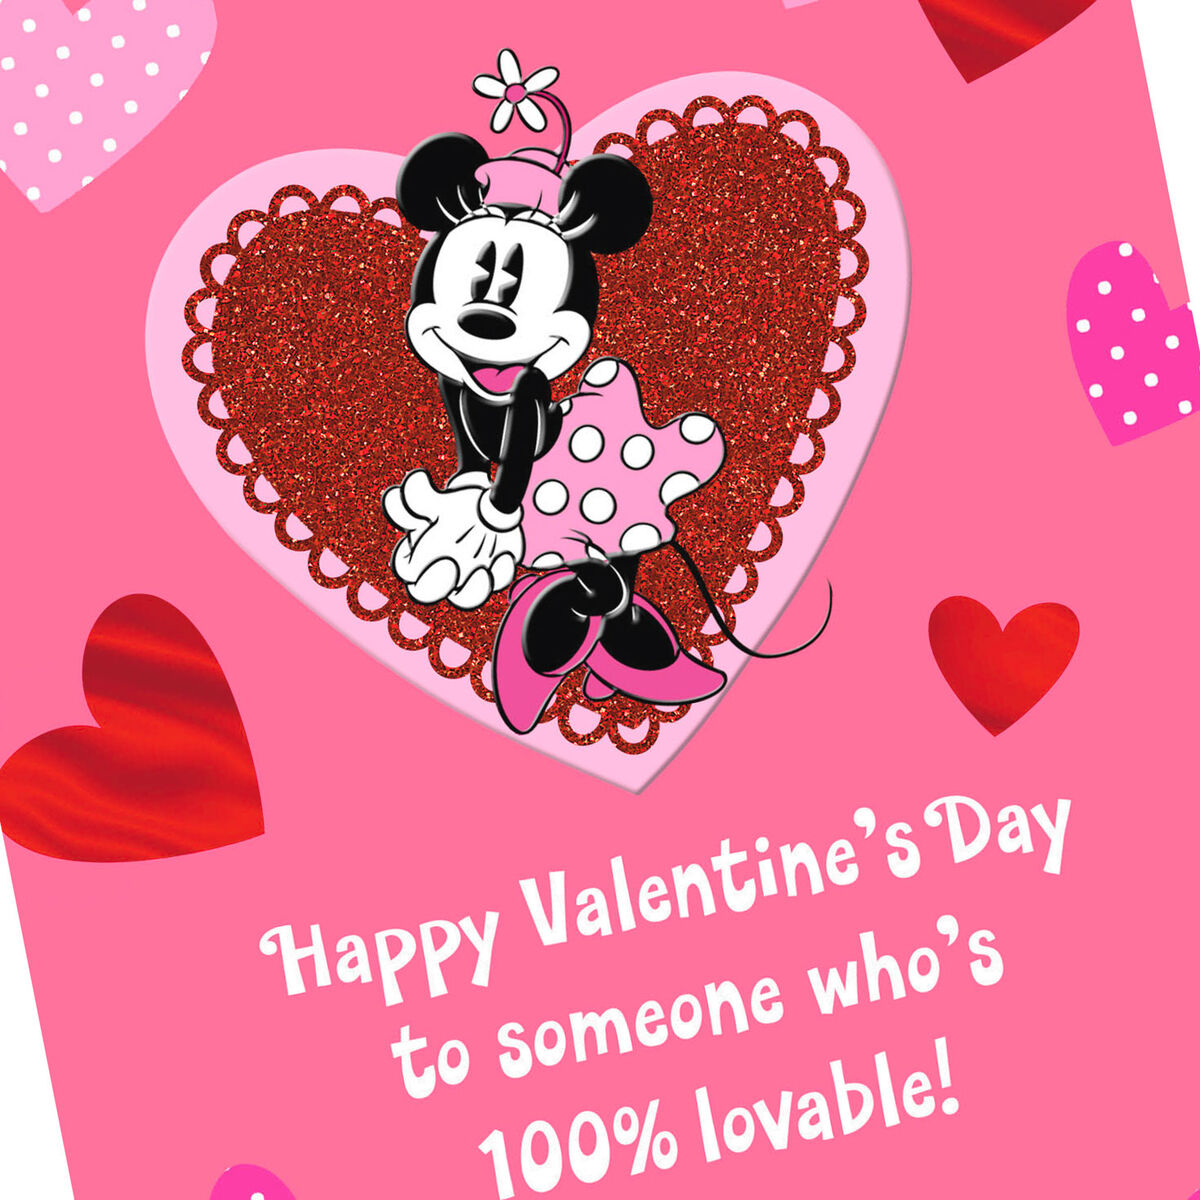 minnie-mouse-lovable-valentine-s-day-card-greeting-cards-hallmark